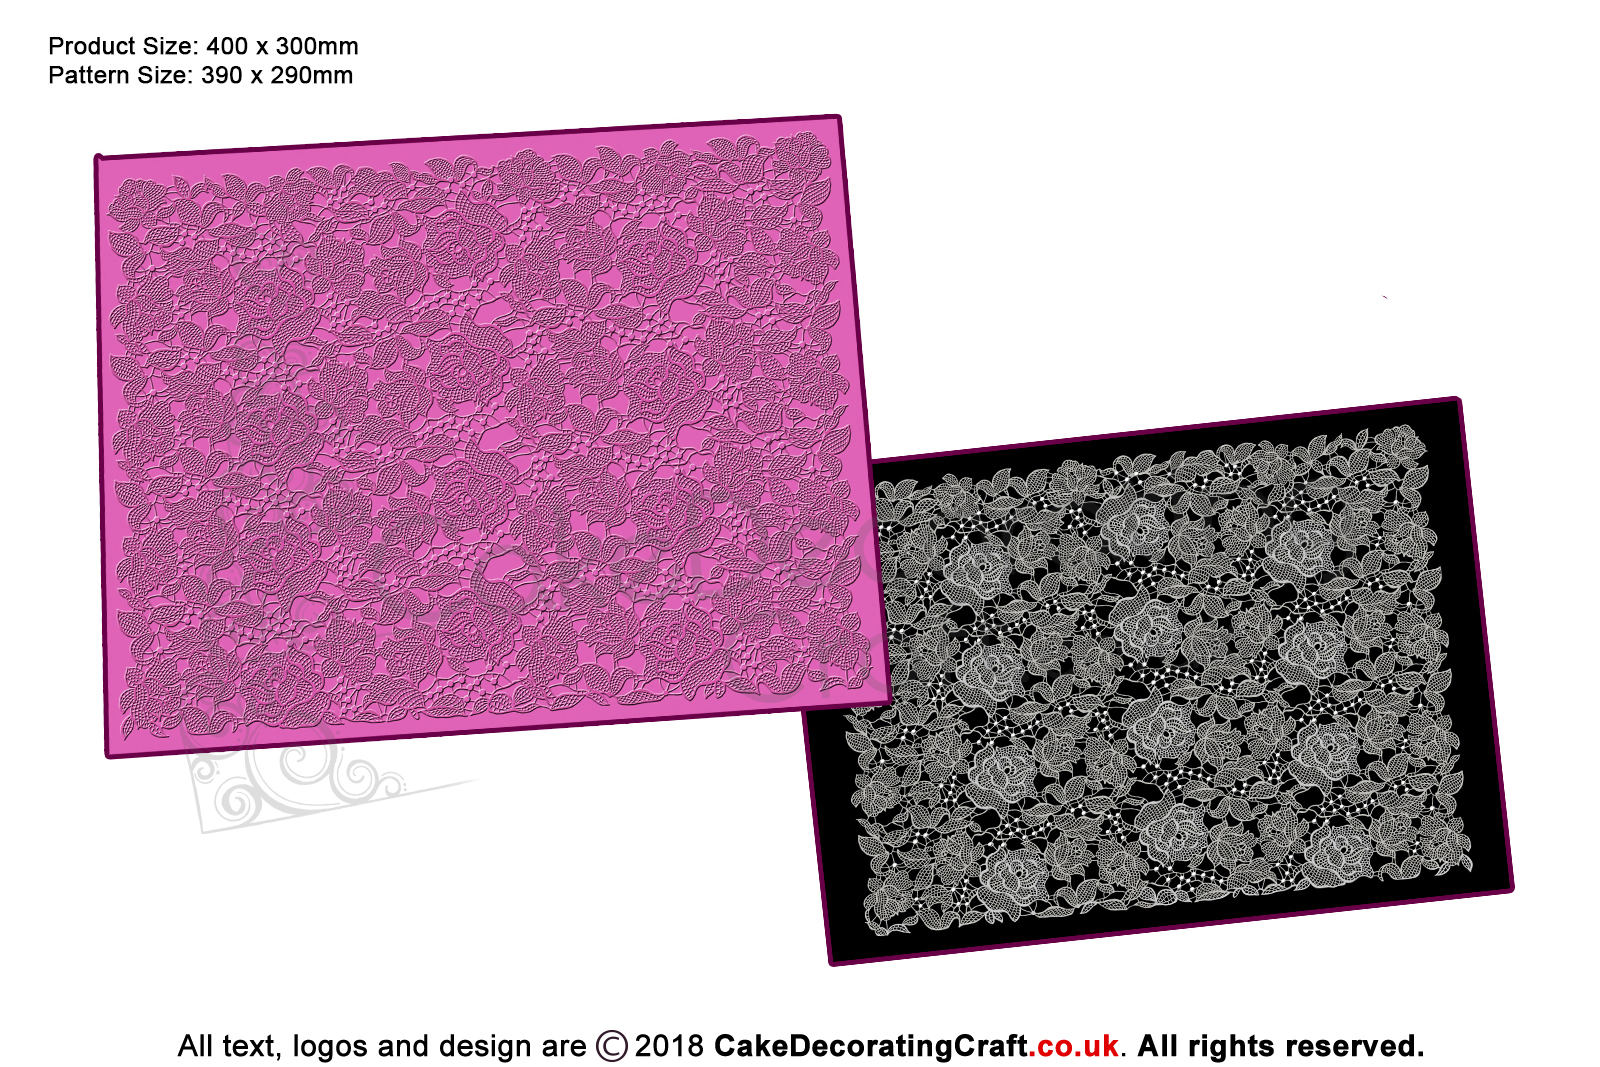 Rose Fabric | Cake Lace Mats for Edible Cake Lace Mixes and Premixes | Cake Decorating Craft Tool | Cake Makers Christmas Gifts Ideas